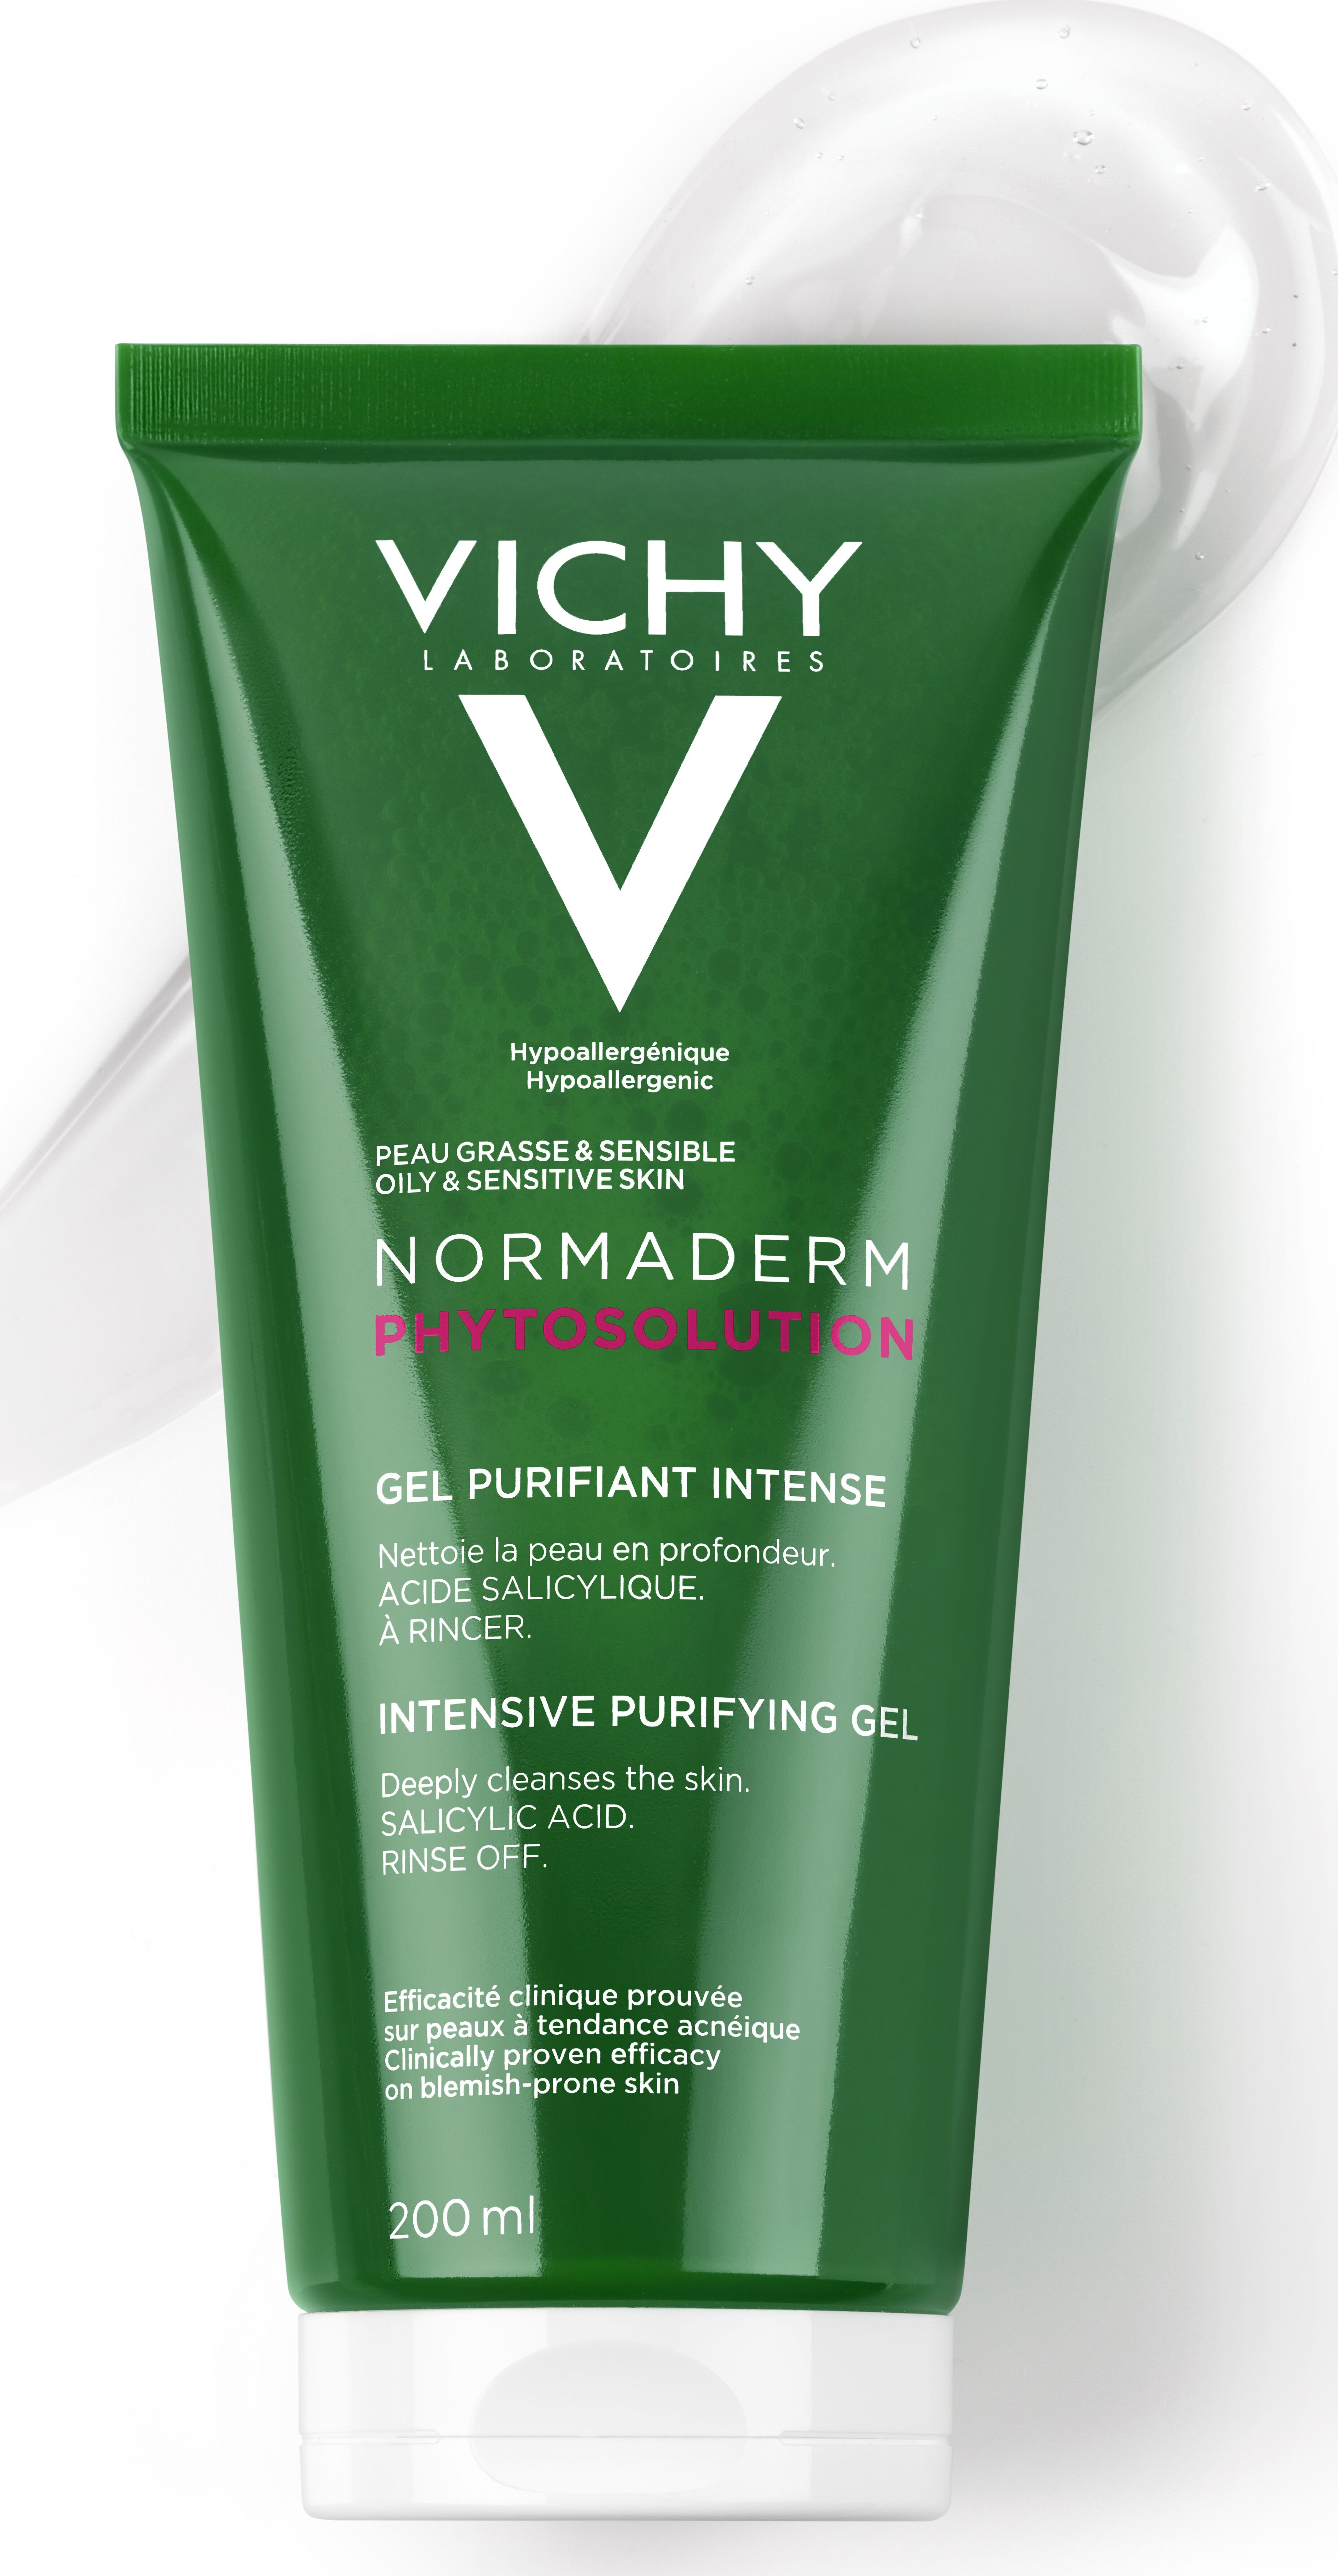 Normaderm phytosolution intensive purifying gel. Vichy Normaderm phytosolution. Vichy Normaderm Gel purifiant intense. Vichy Normaderm phytosolution 15 капсул. Vichy Normaderm Gel purifiant intense Intensive Purifying Gel.